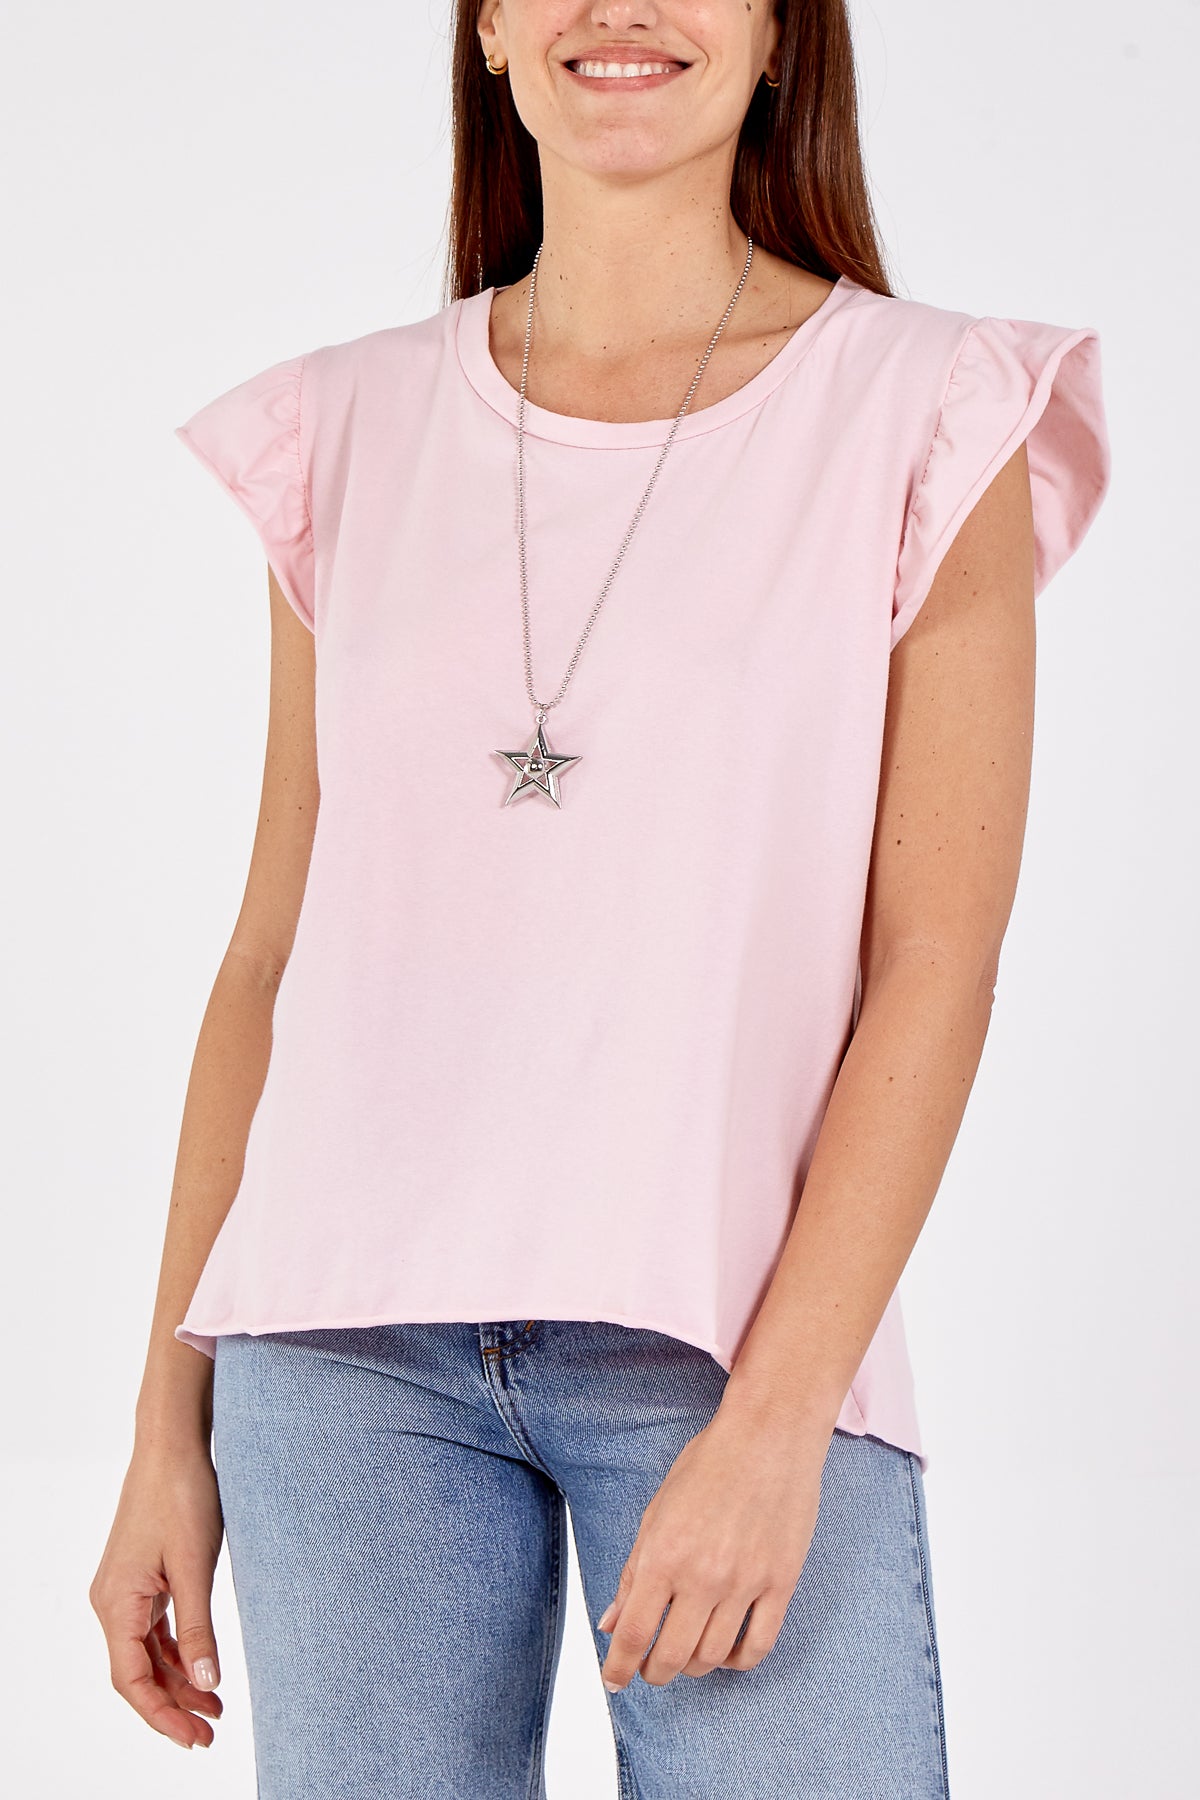 Scoop Neck Frill Sleeve Top With Necklace